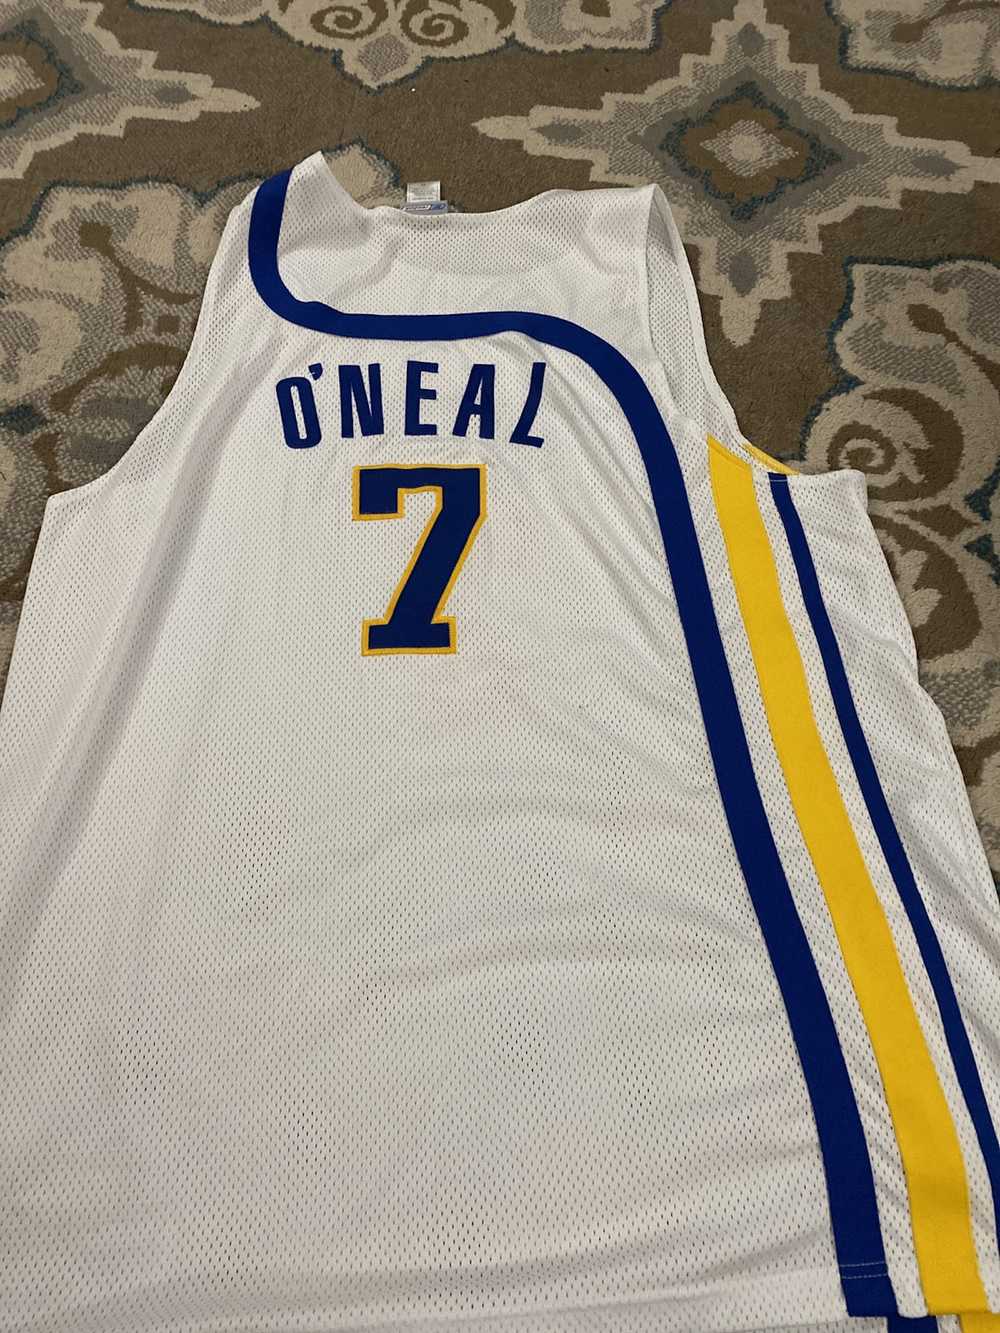 Reebok O’Neal Pacers Basketball Jersey Stitched R… - image 3